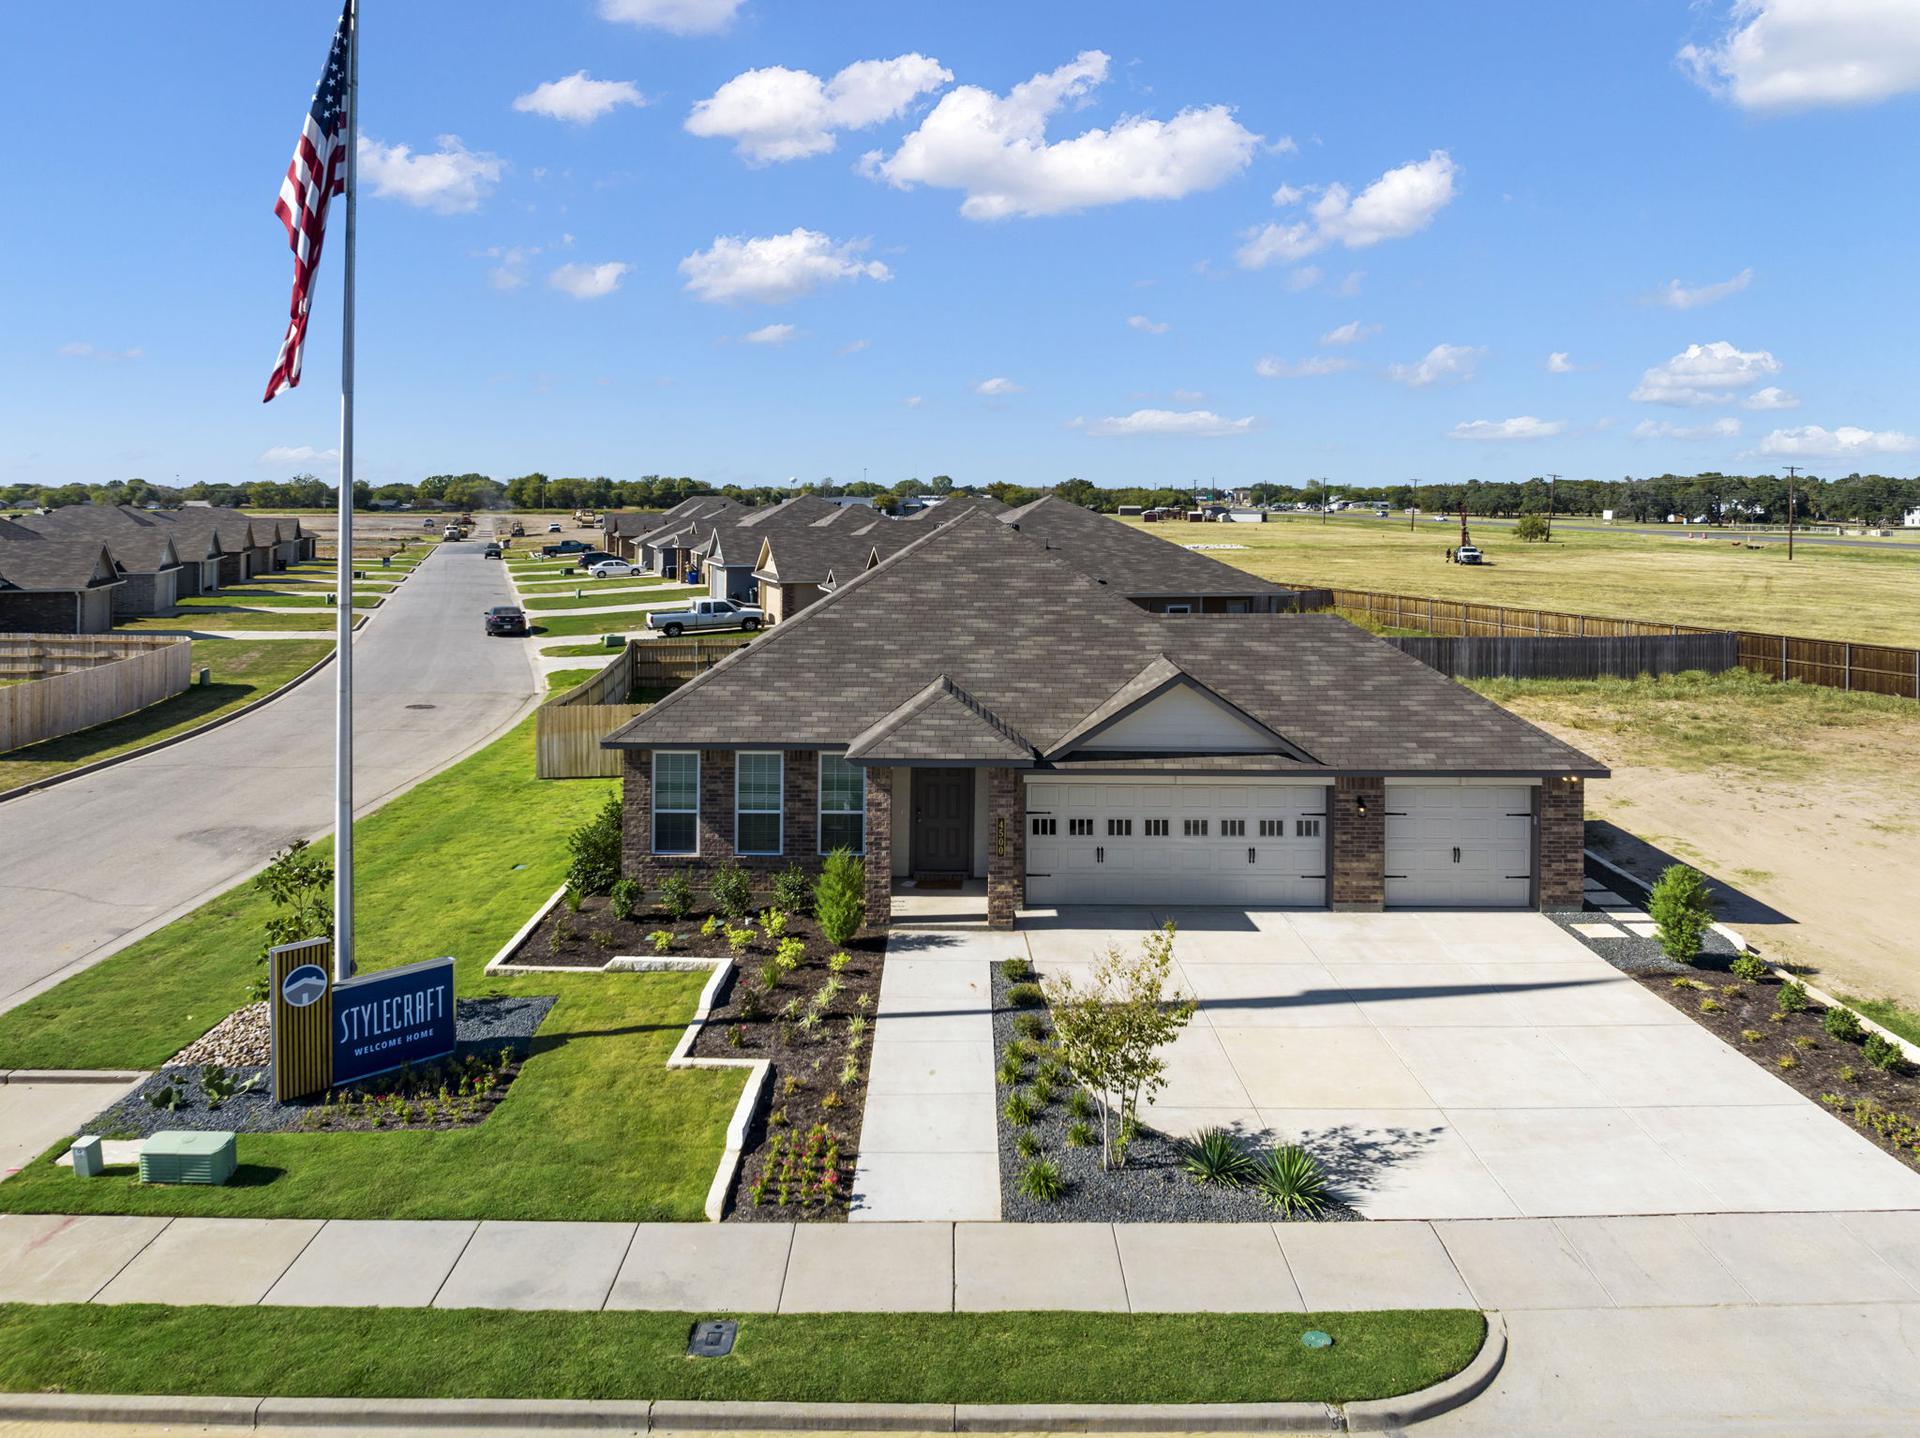 South Fork New Homes in Waco, TX